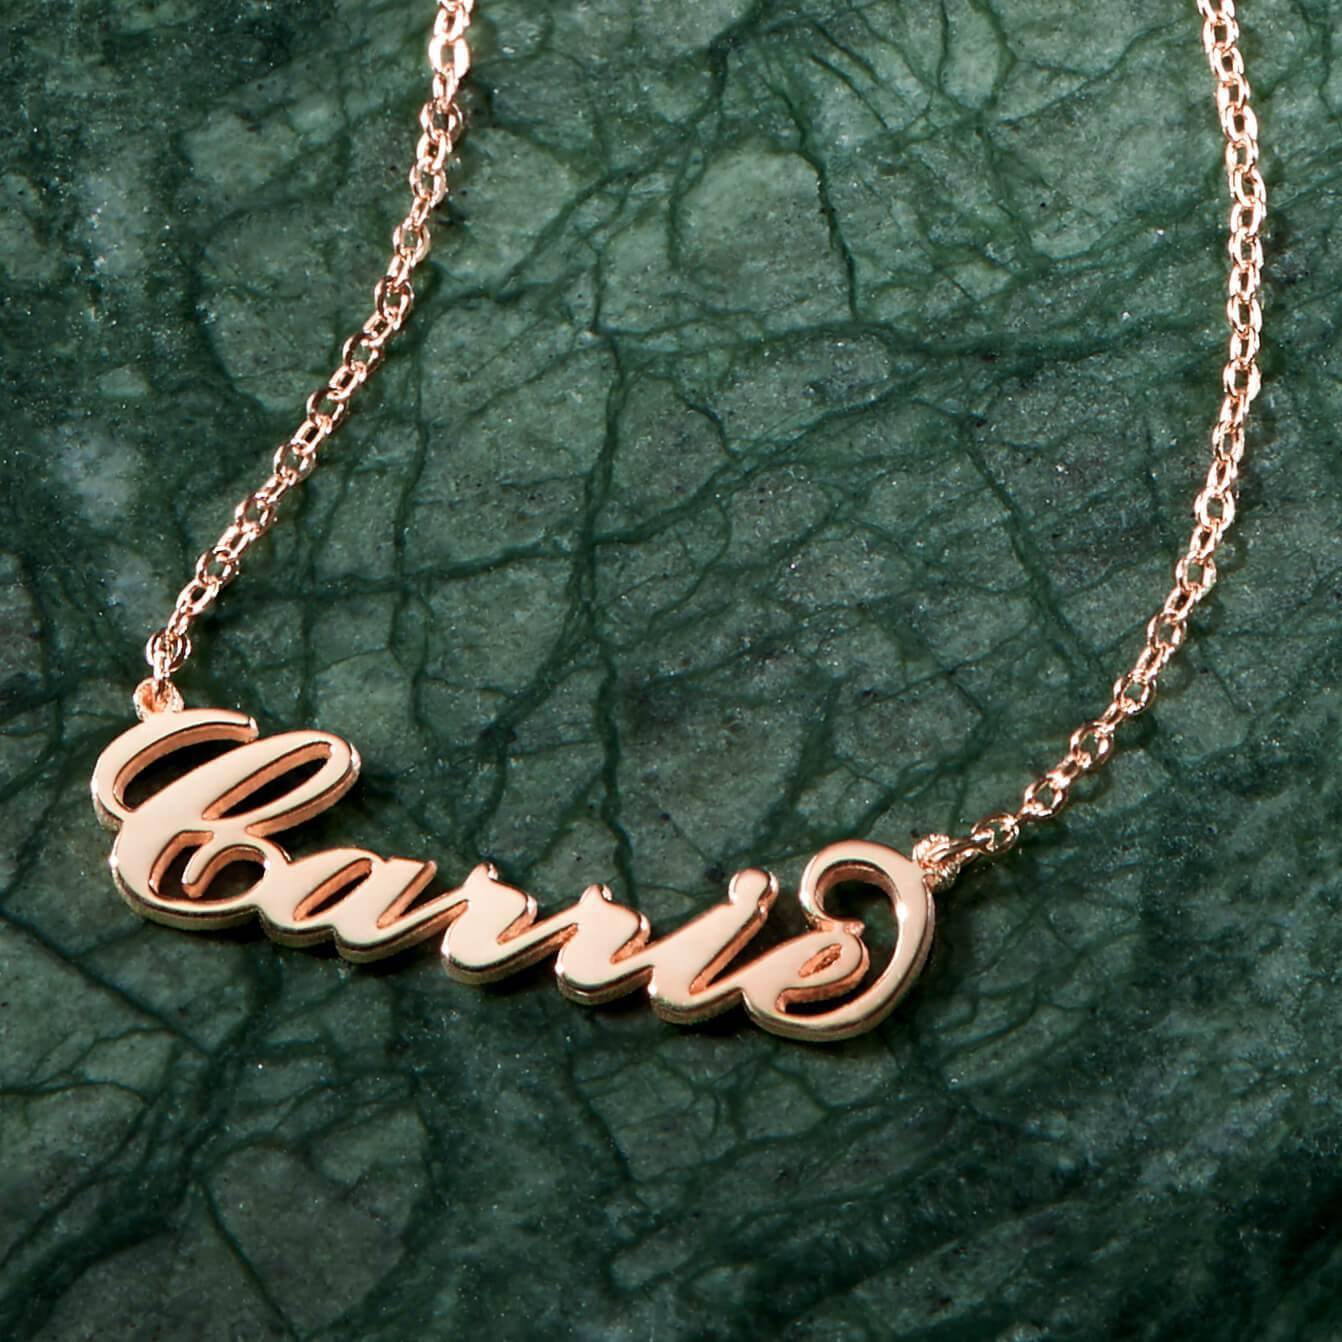 Carrie Style Name Necklace 14K Gold Plated Silver - soufeelus